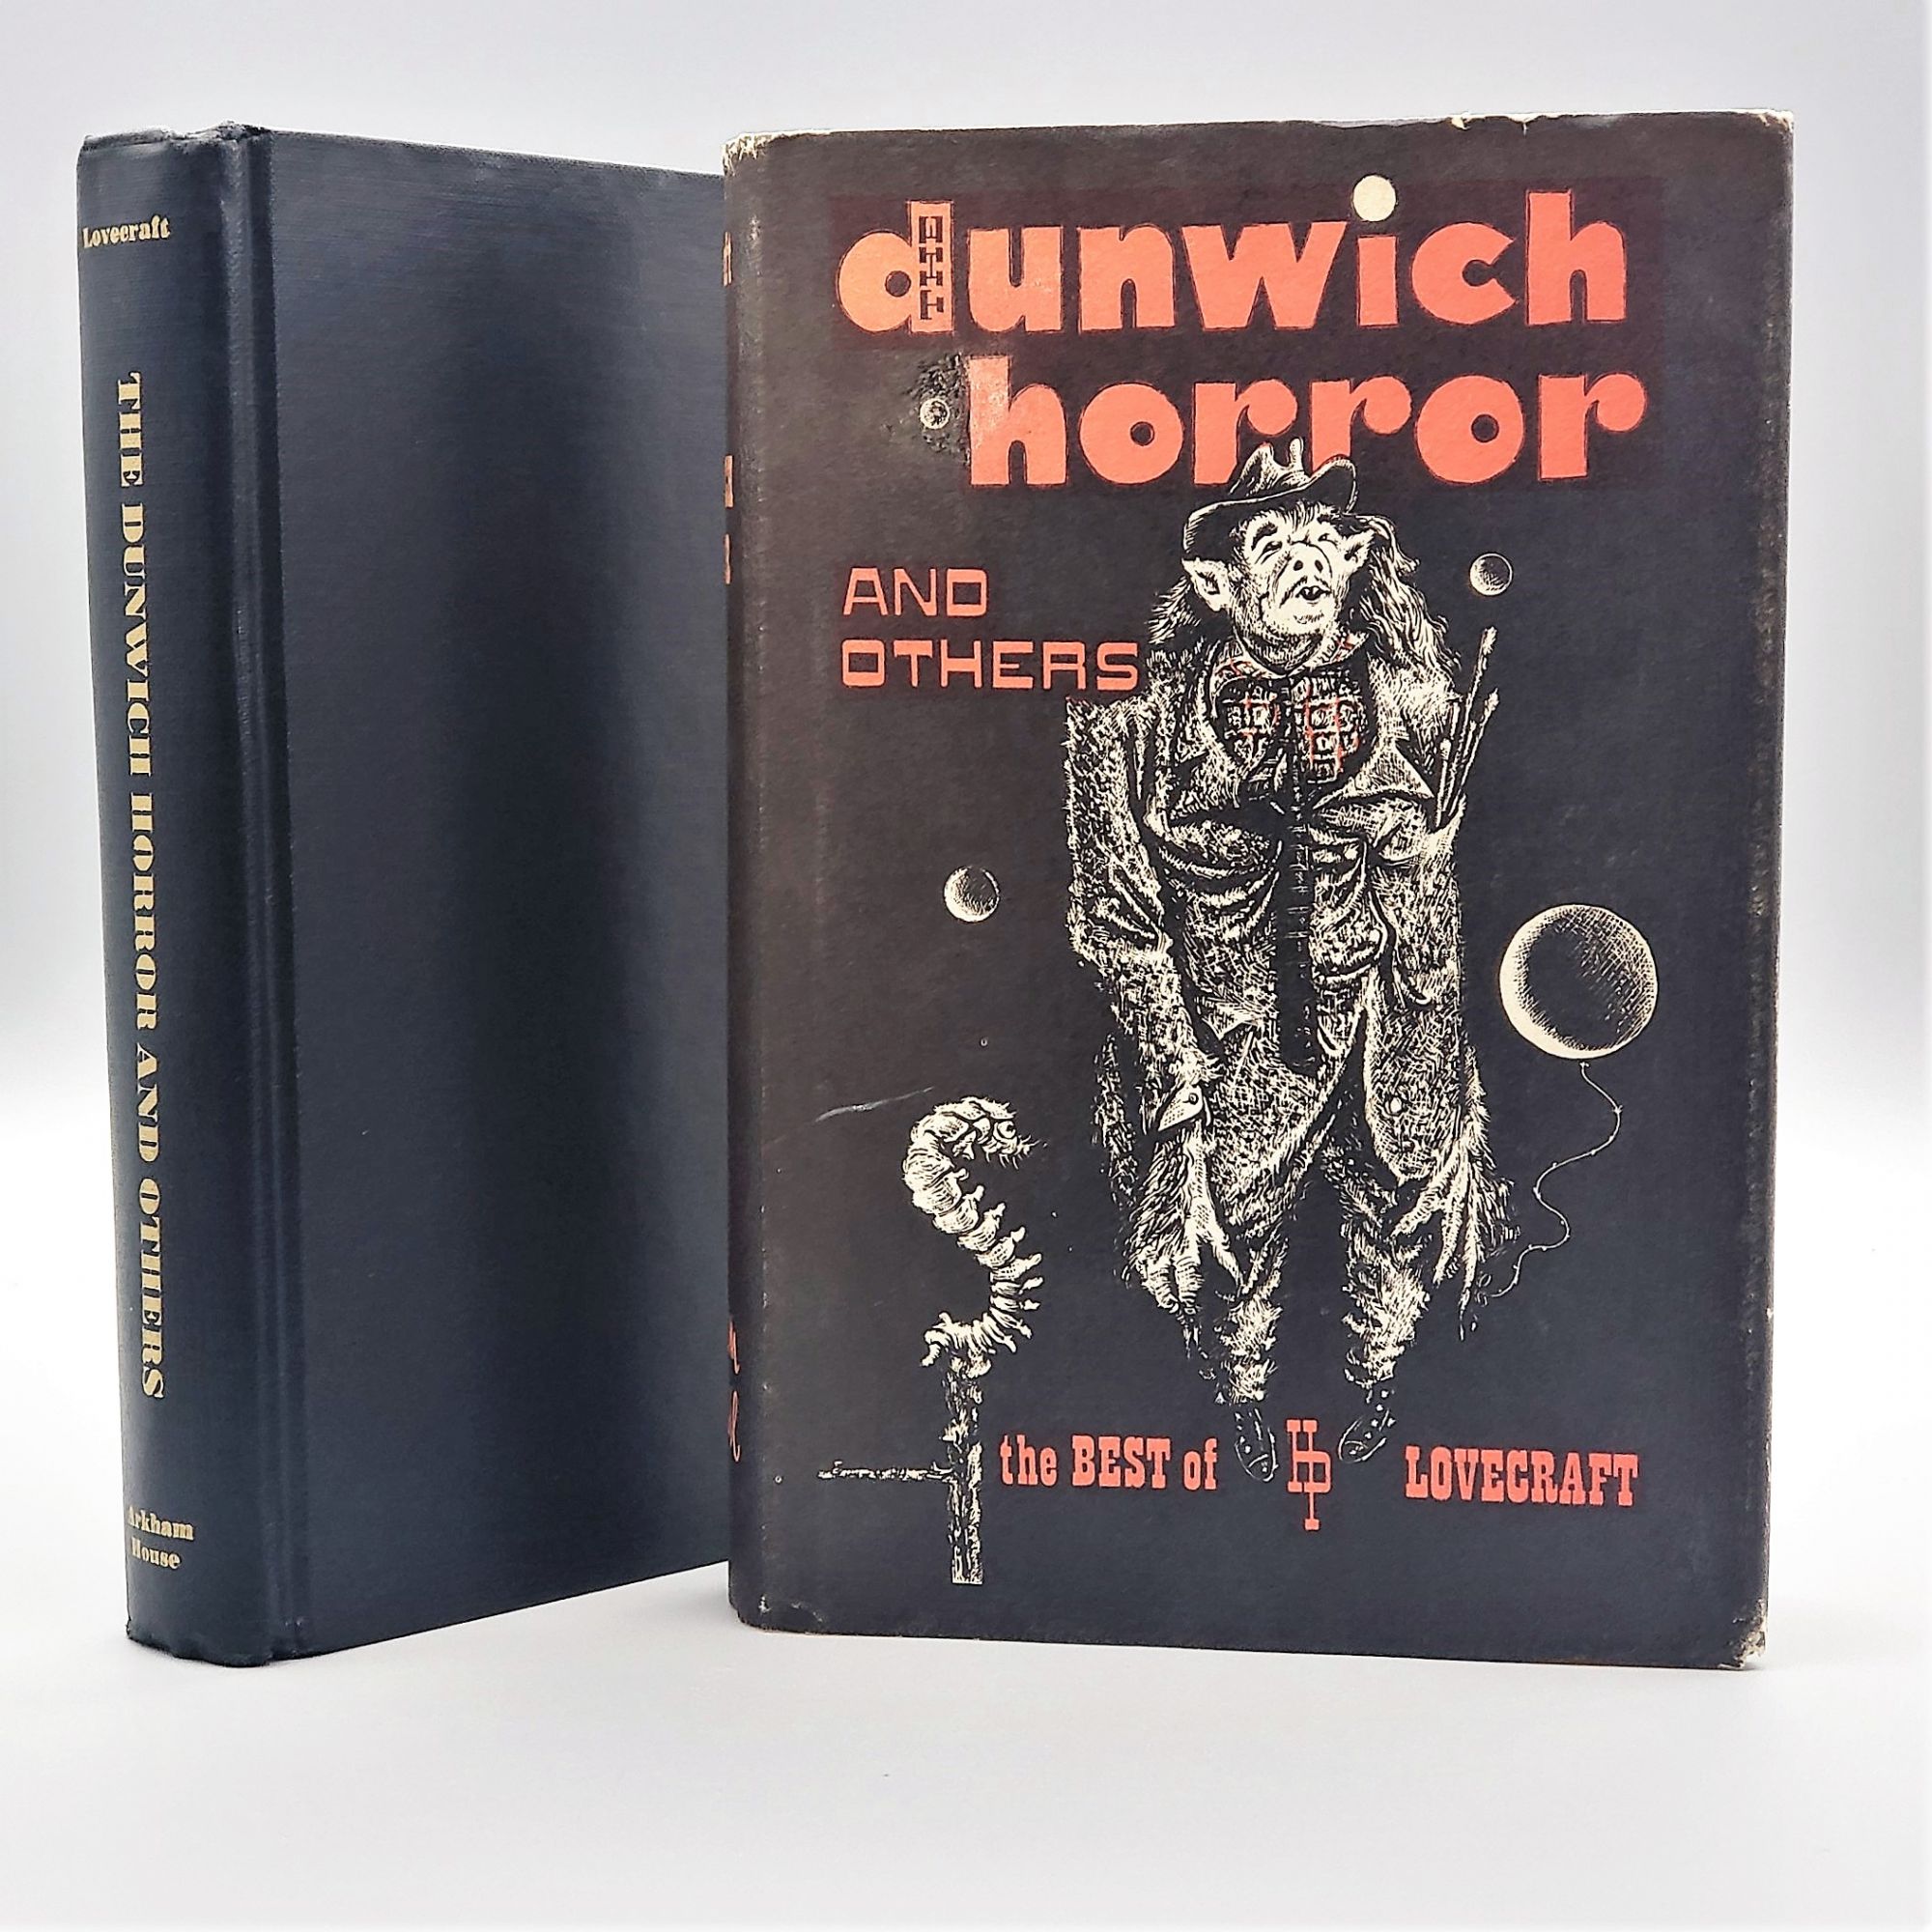 The Dunwich Horror by H. P. Lovecraft on Memento Mori Books